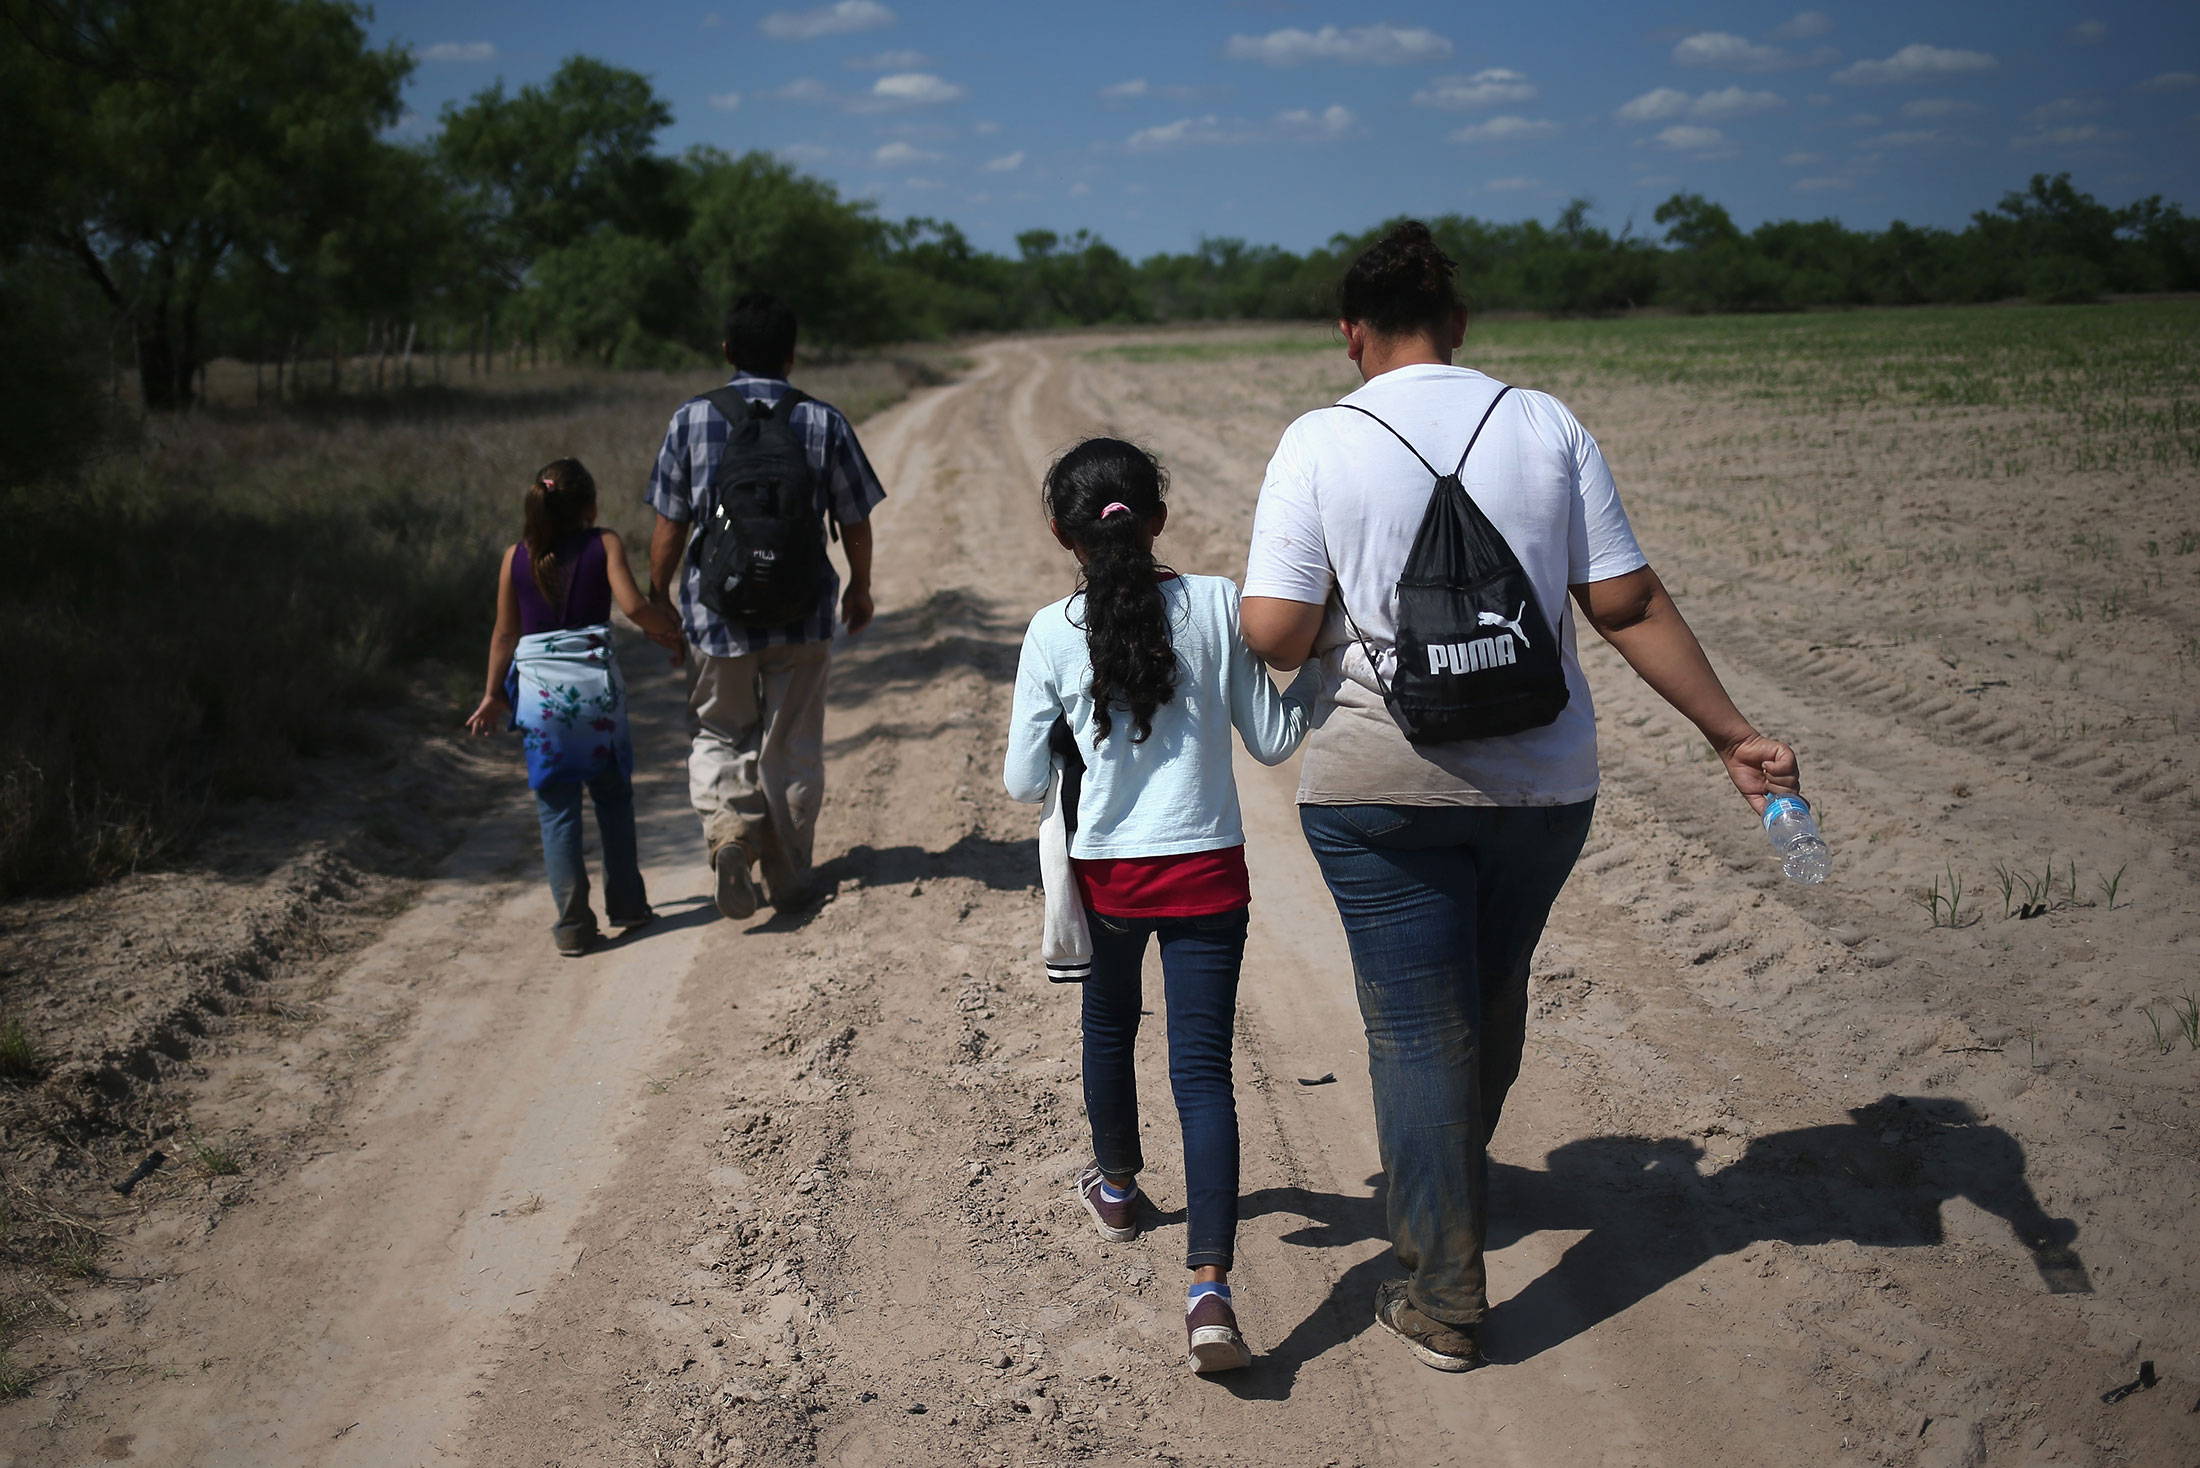 Central American immigrant families walk through the countryside after crossing from Mexico into the United States to seek asylum on April 14, 2016 in Roma, Texas.
